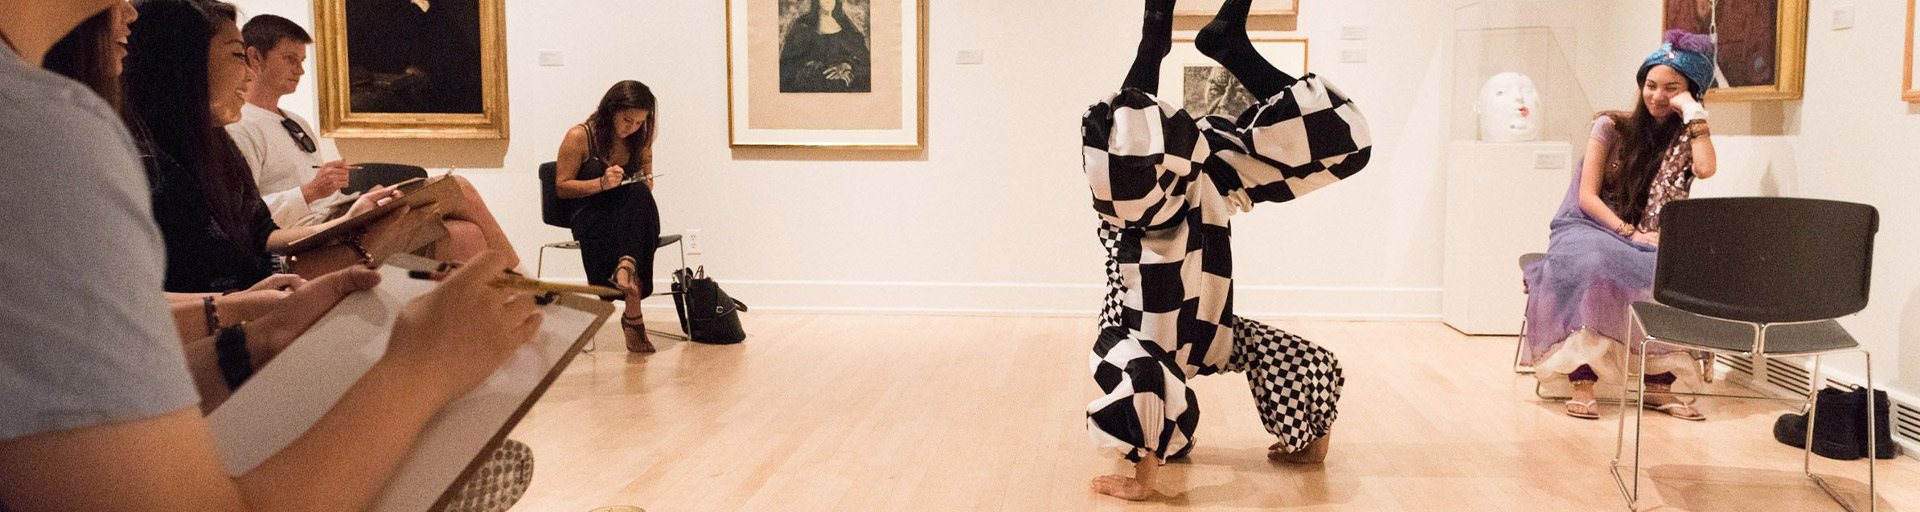 headstand in the art museum